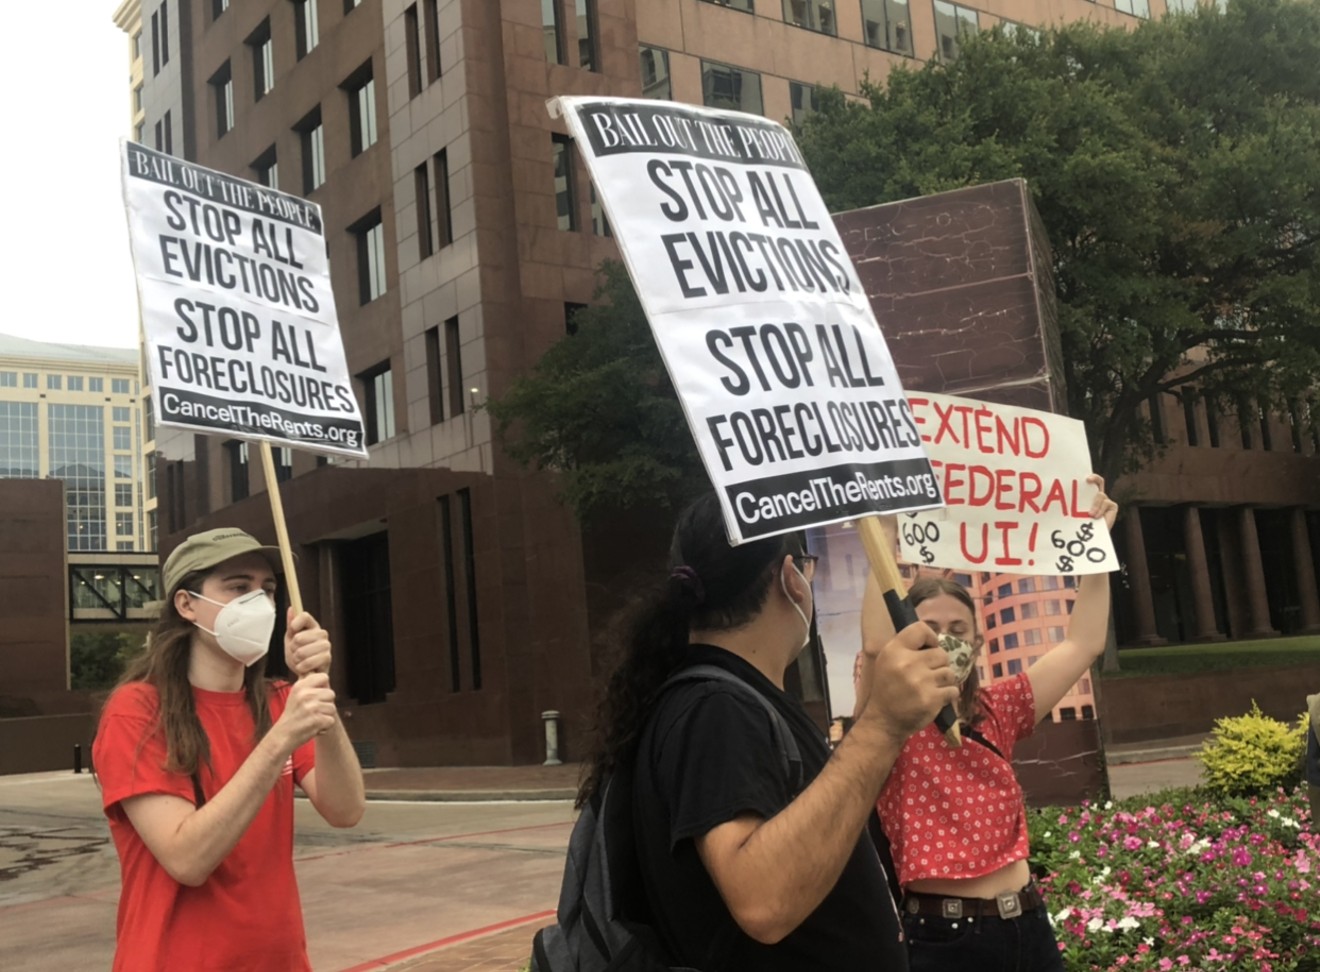 North Texans gather outside U.S. Sen. John Cornyn's office building waving signs that read "Stop All Evictions" and "Let Us Live."